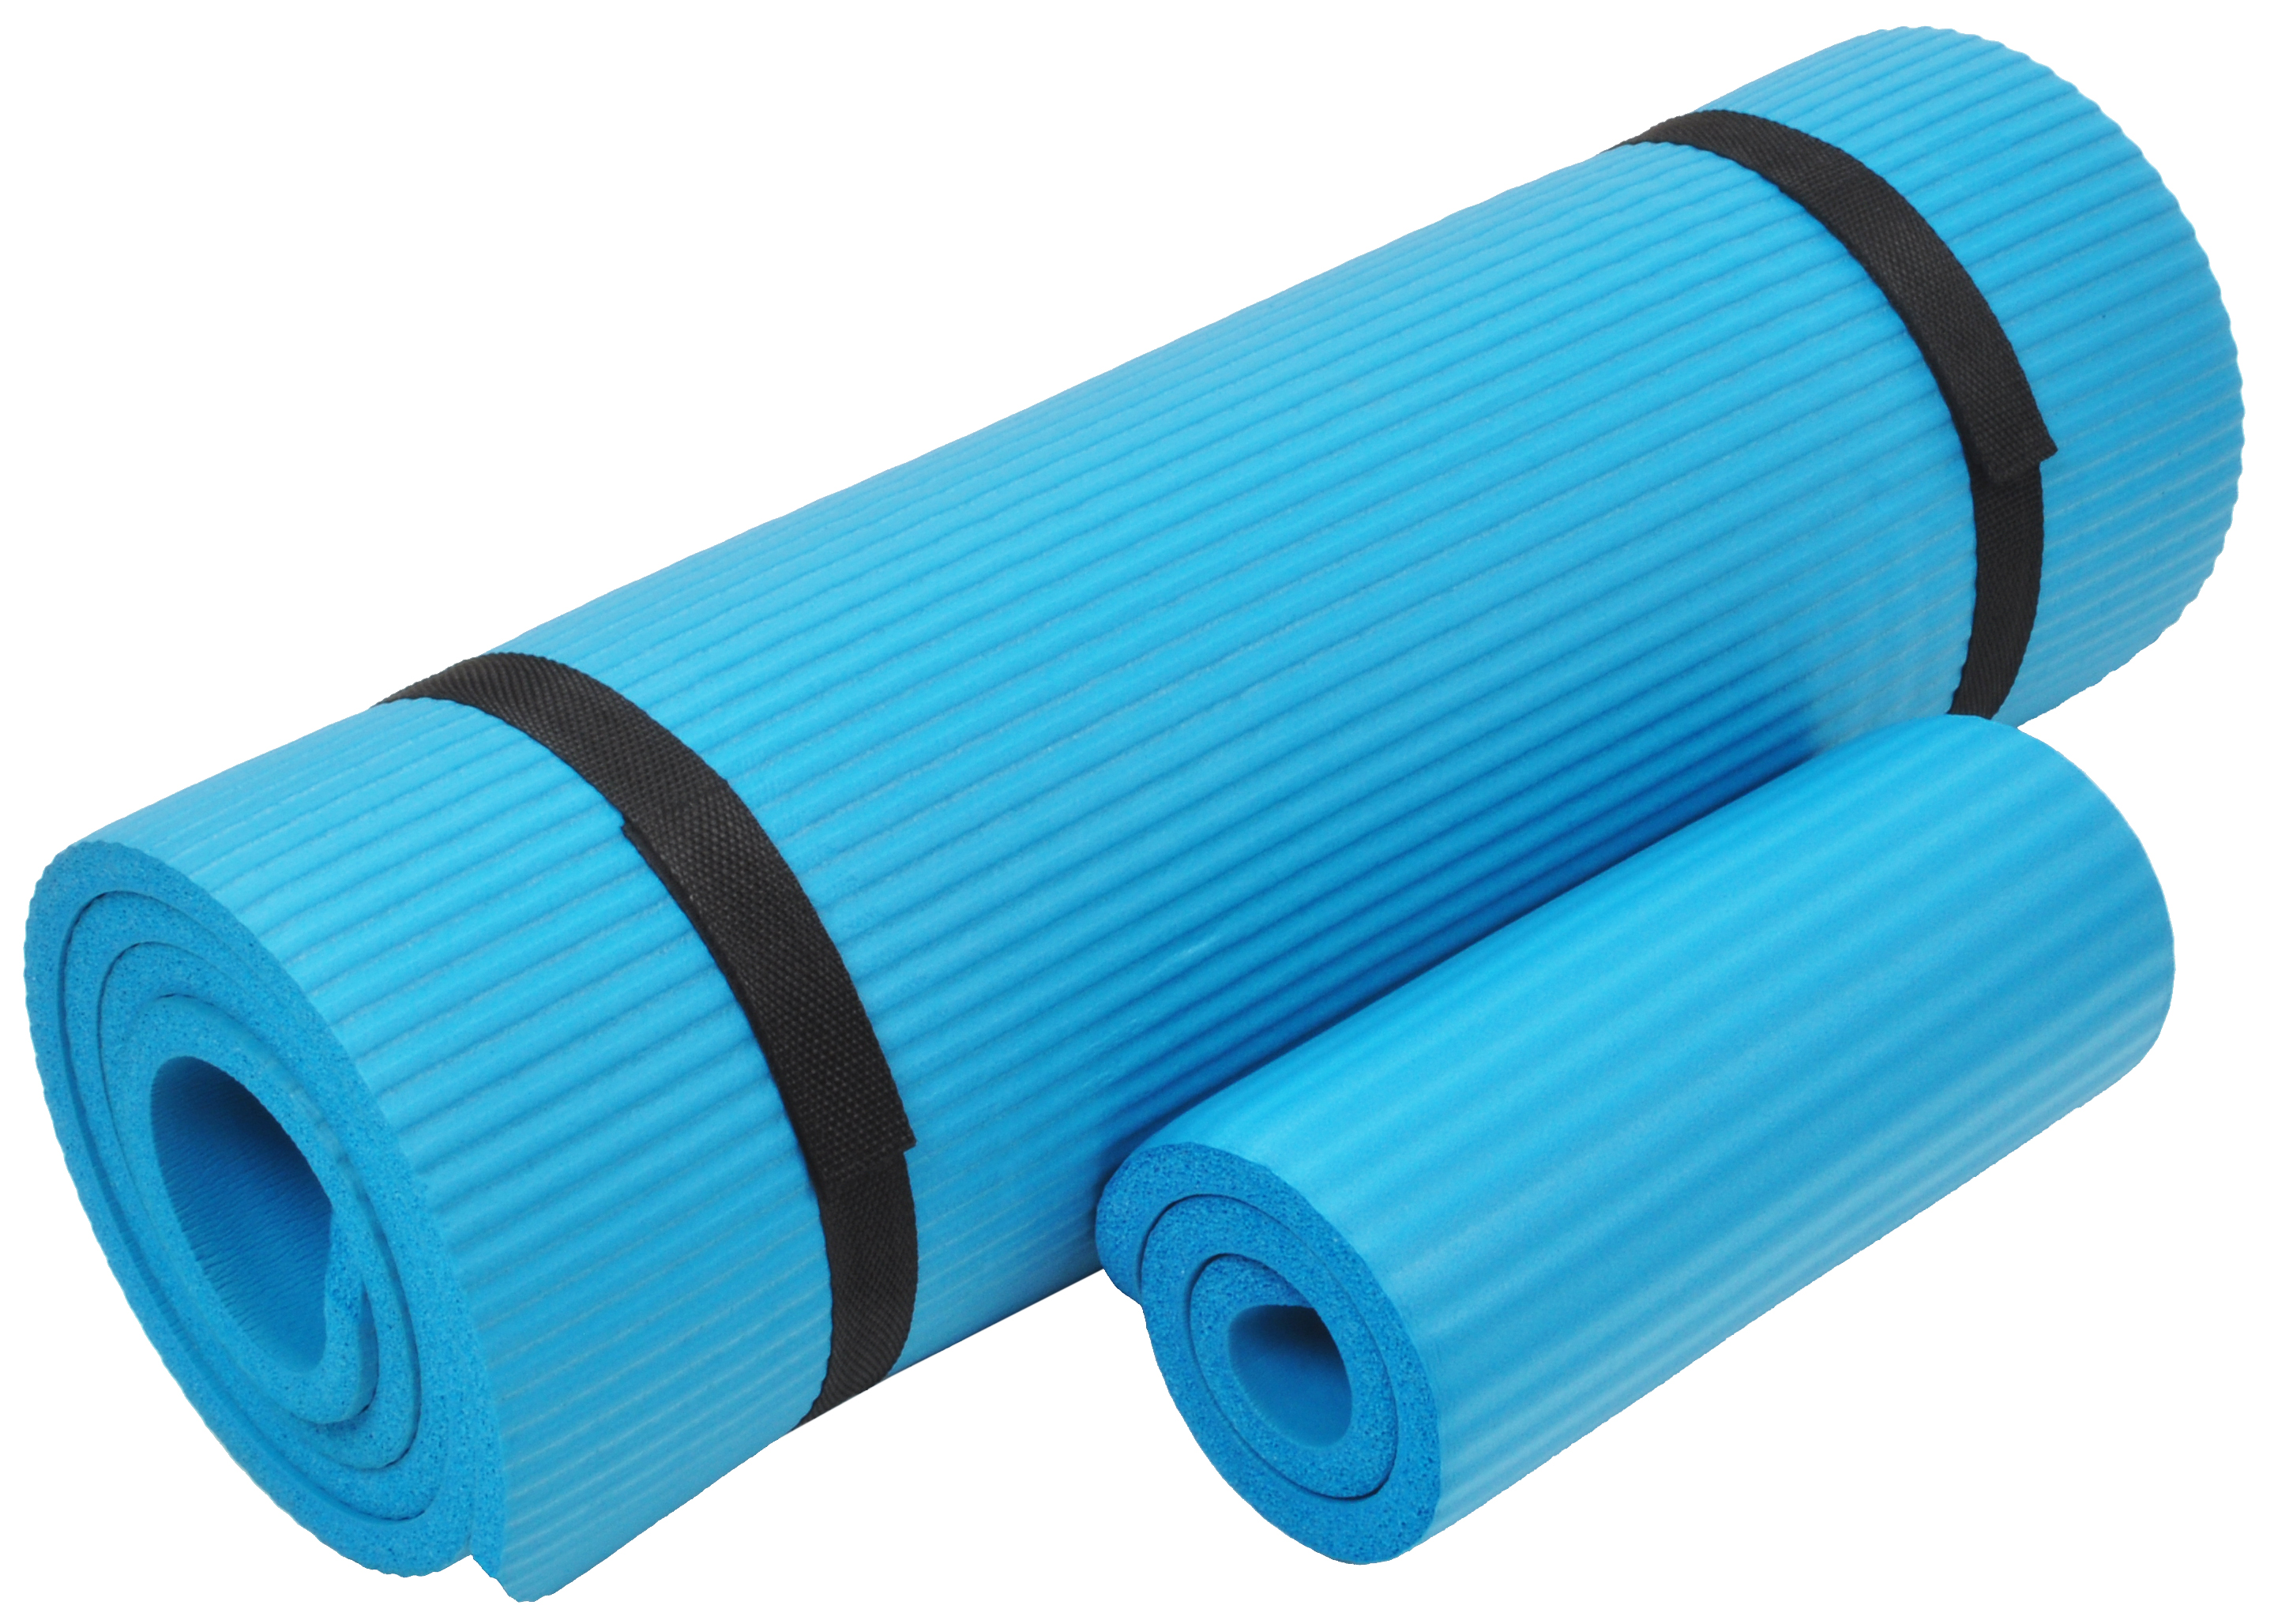 BalanceFrom + All-Purpose 1/2-In. Extra Thick, High Density, Anti-Tear Exercise Yoga Mat and Knee Pad with Carrying Strap - image 2 of 6